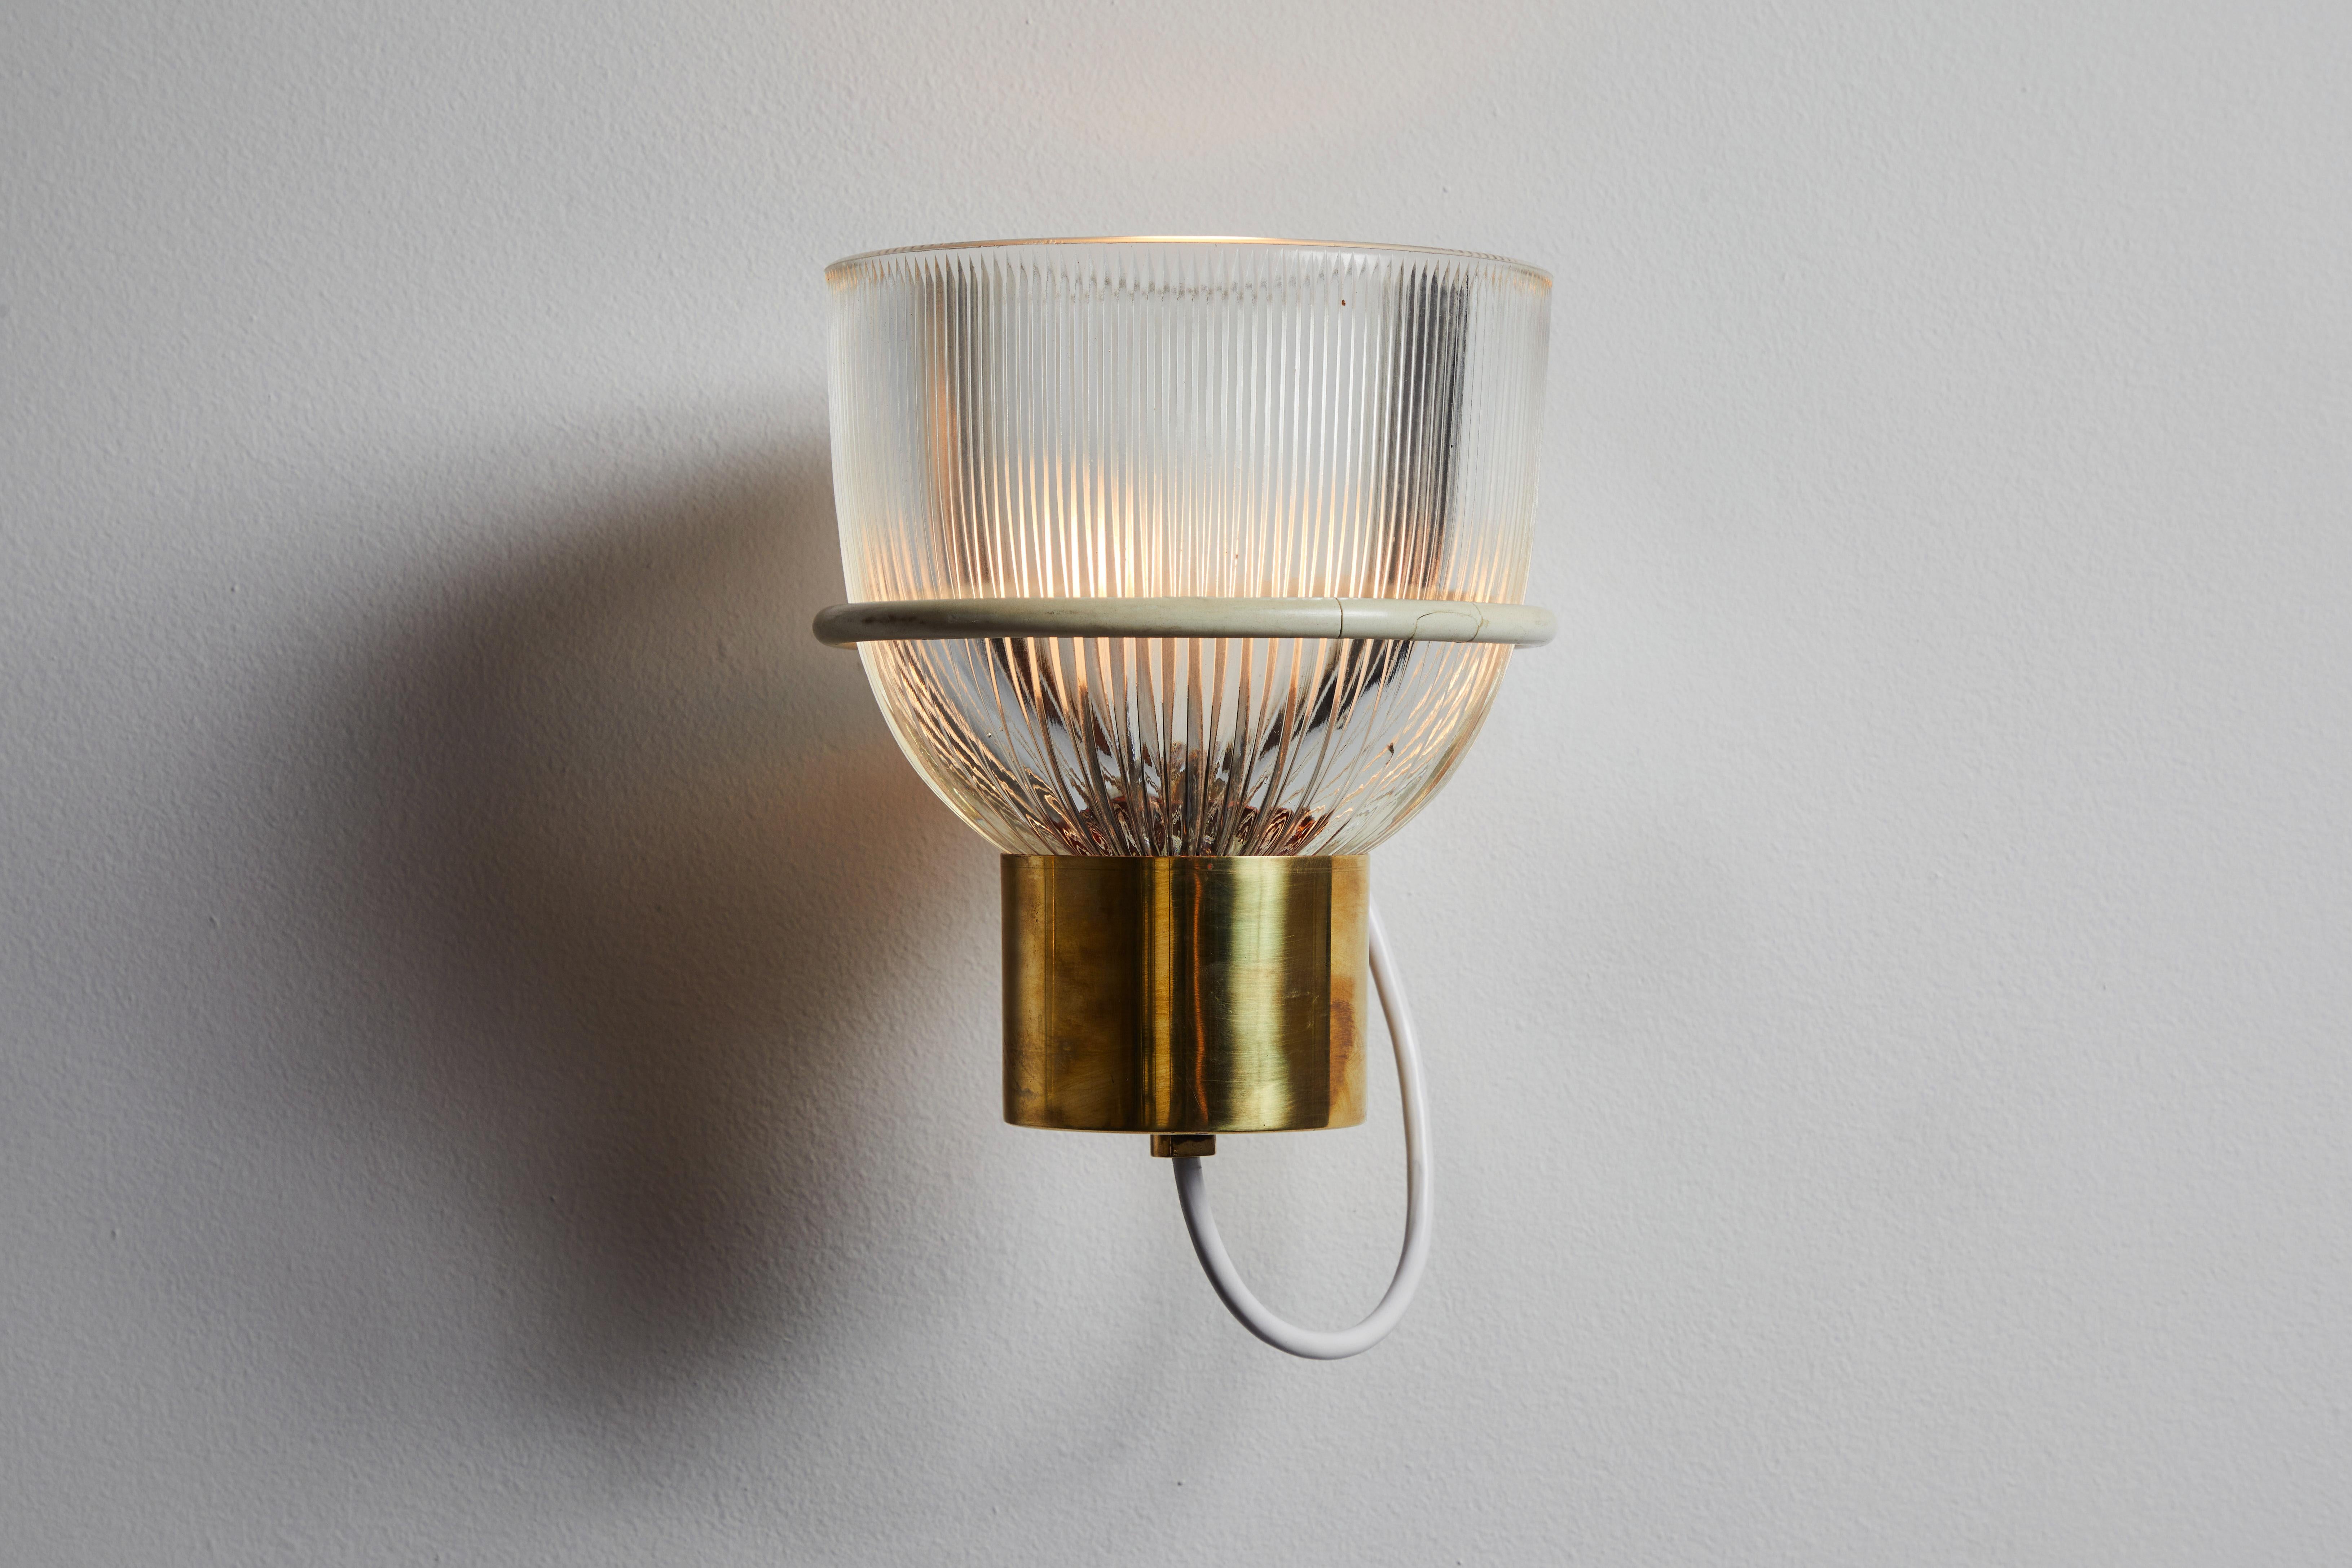 One sconce by Tito Agnoli for Oluce . Designed and manufactured in Italy, circa 1950s. Glass, brass, custom brass backplates. Rewired for U.S. standards. We recommend one E27 100w maximum bulb. Bulbs provided as a one time courtesy. Priced and sold